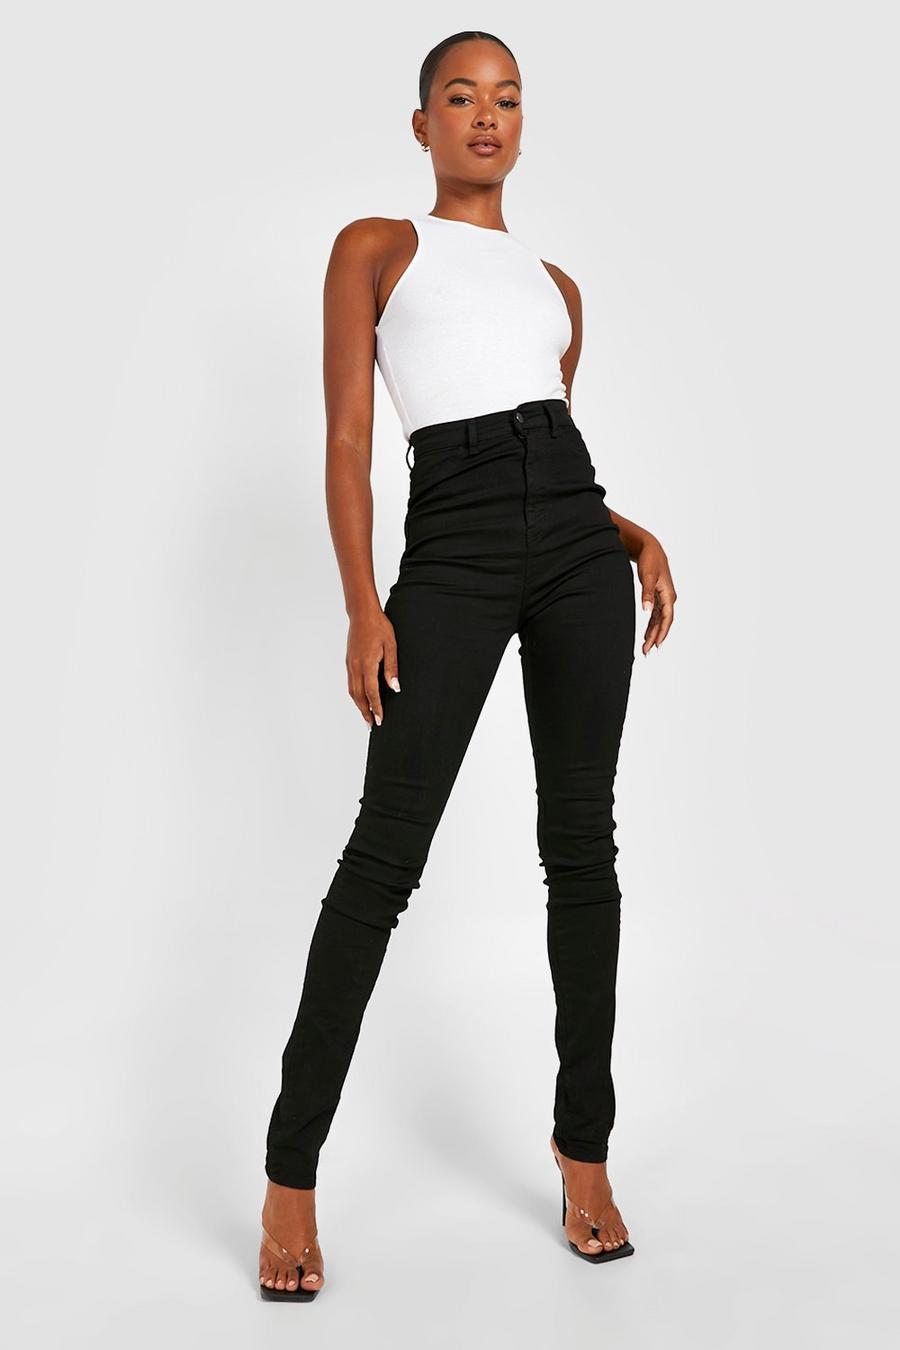 Tall Jeans, Long Jeans For Women